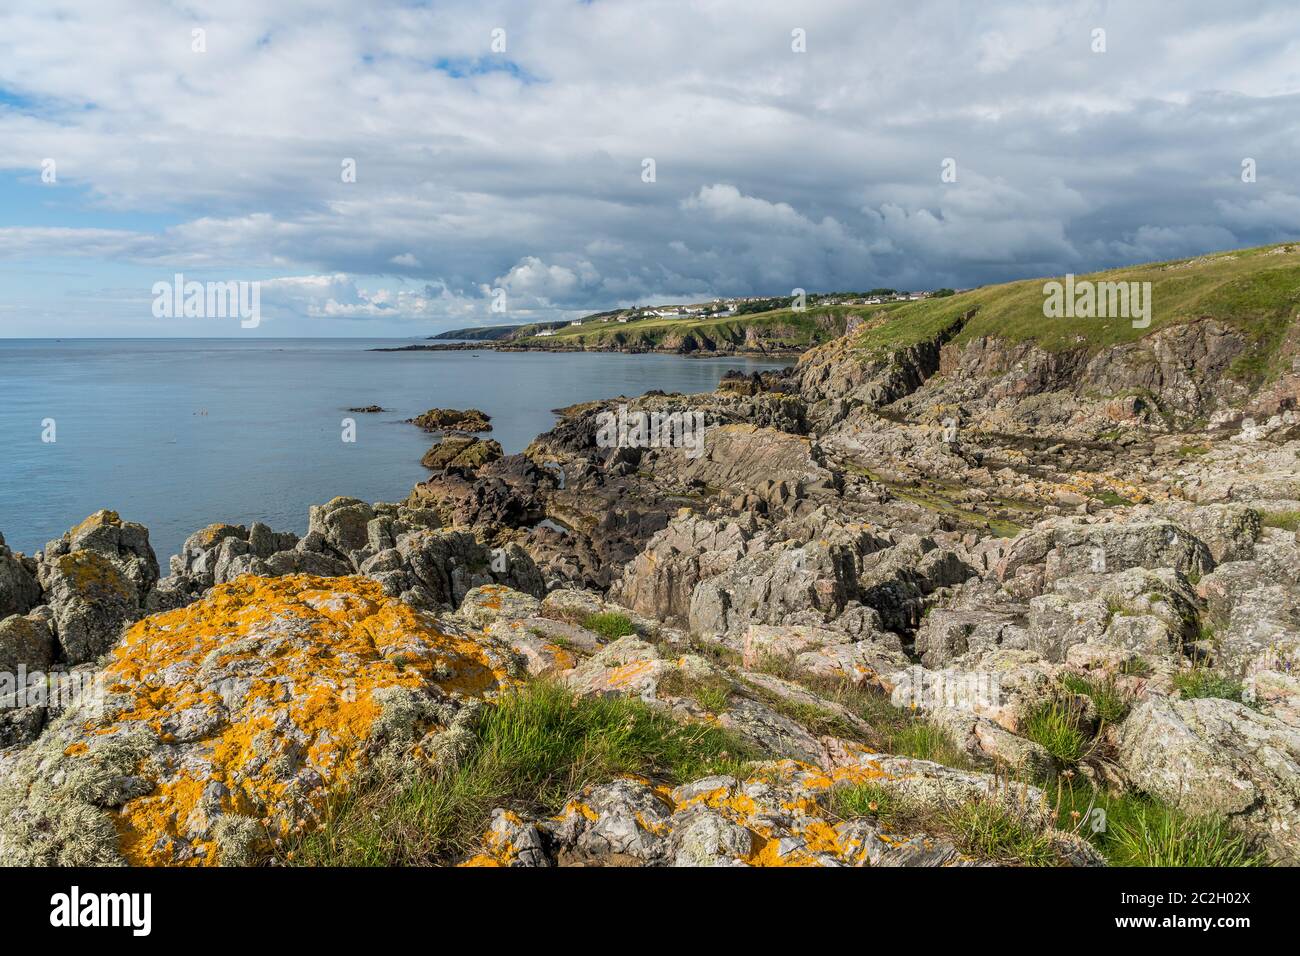 A view along the coastline to cove. Stock Photo